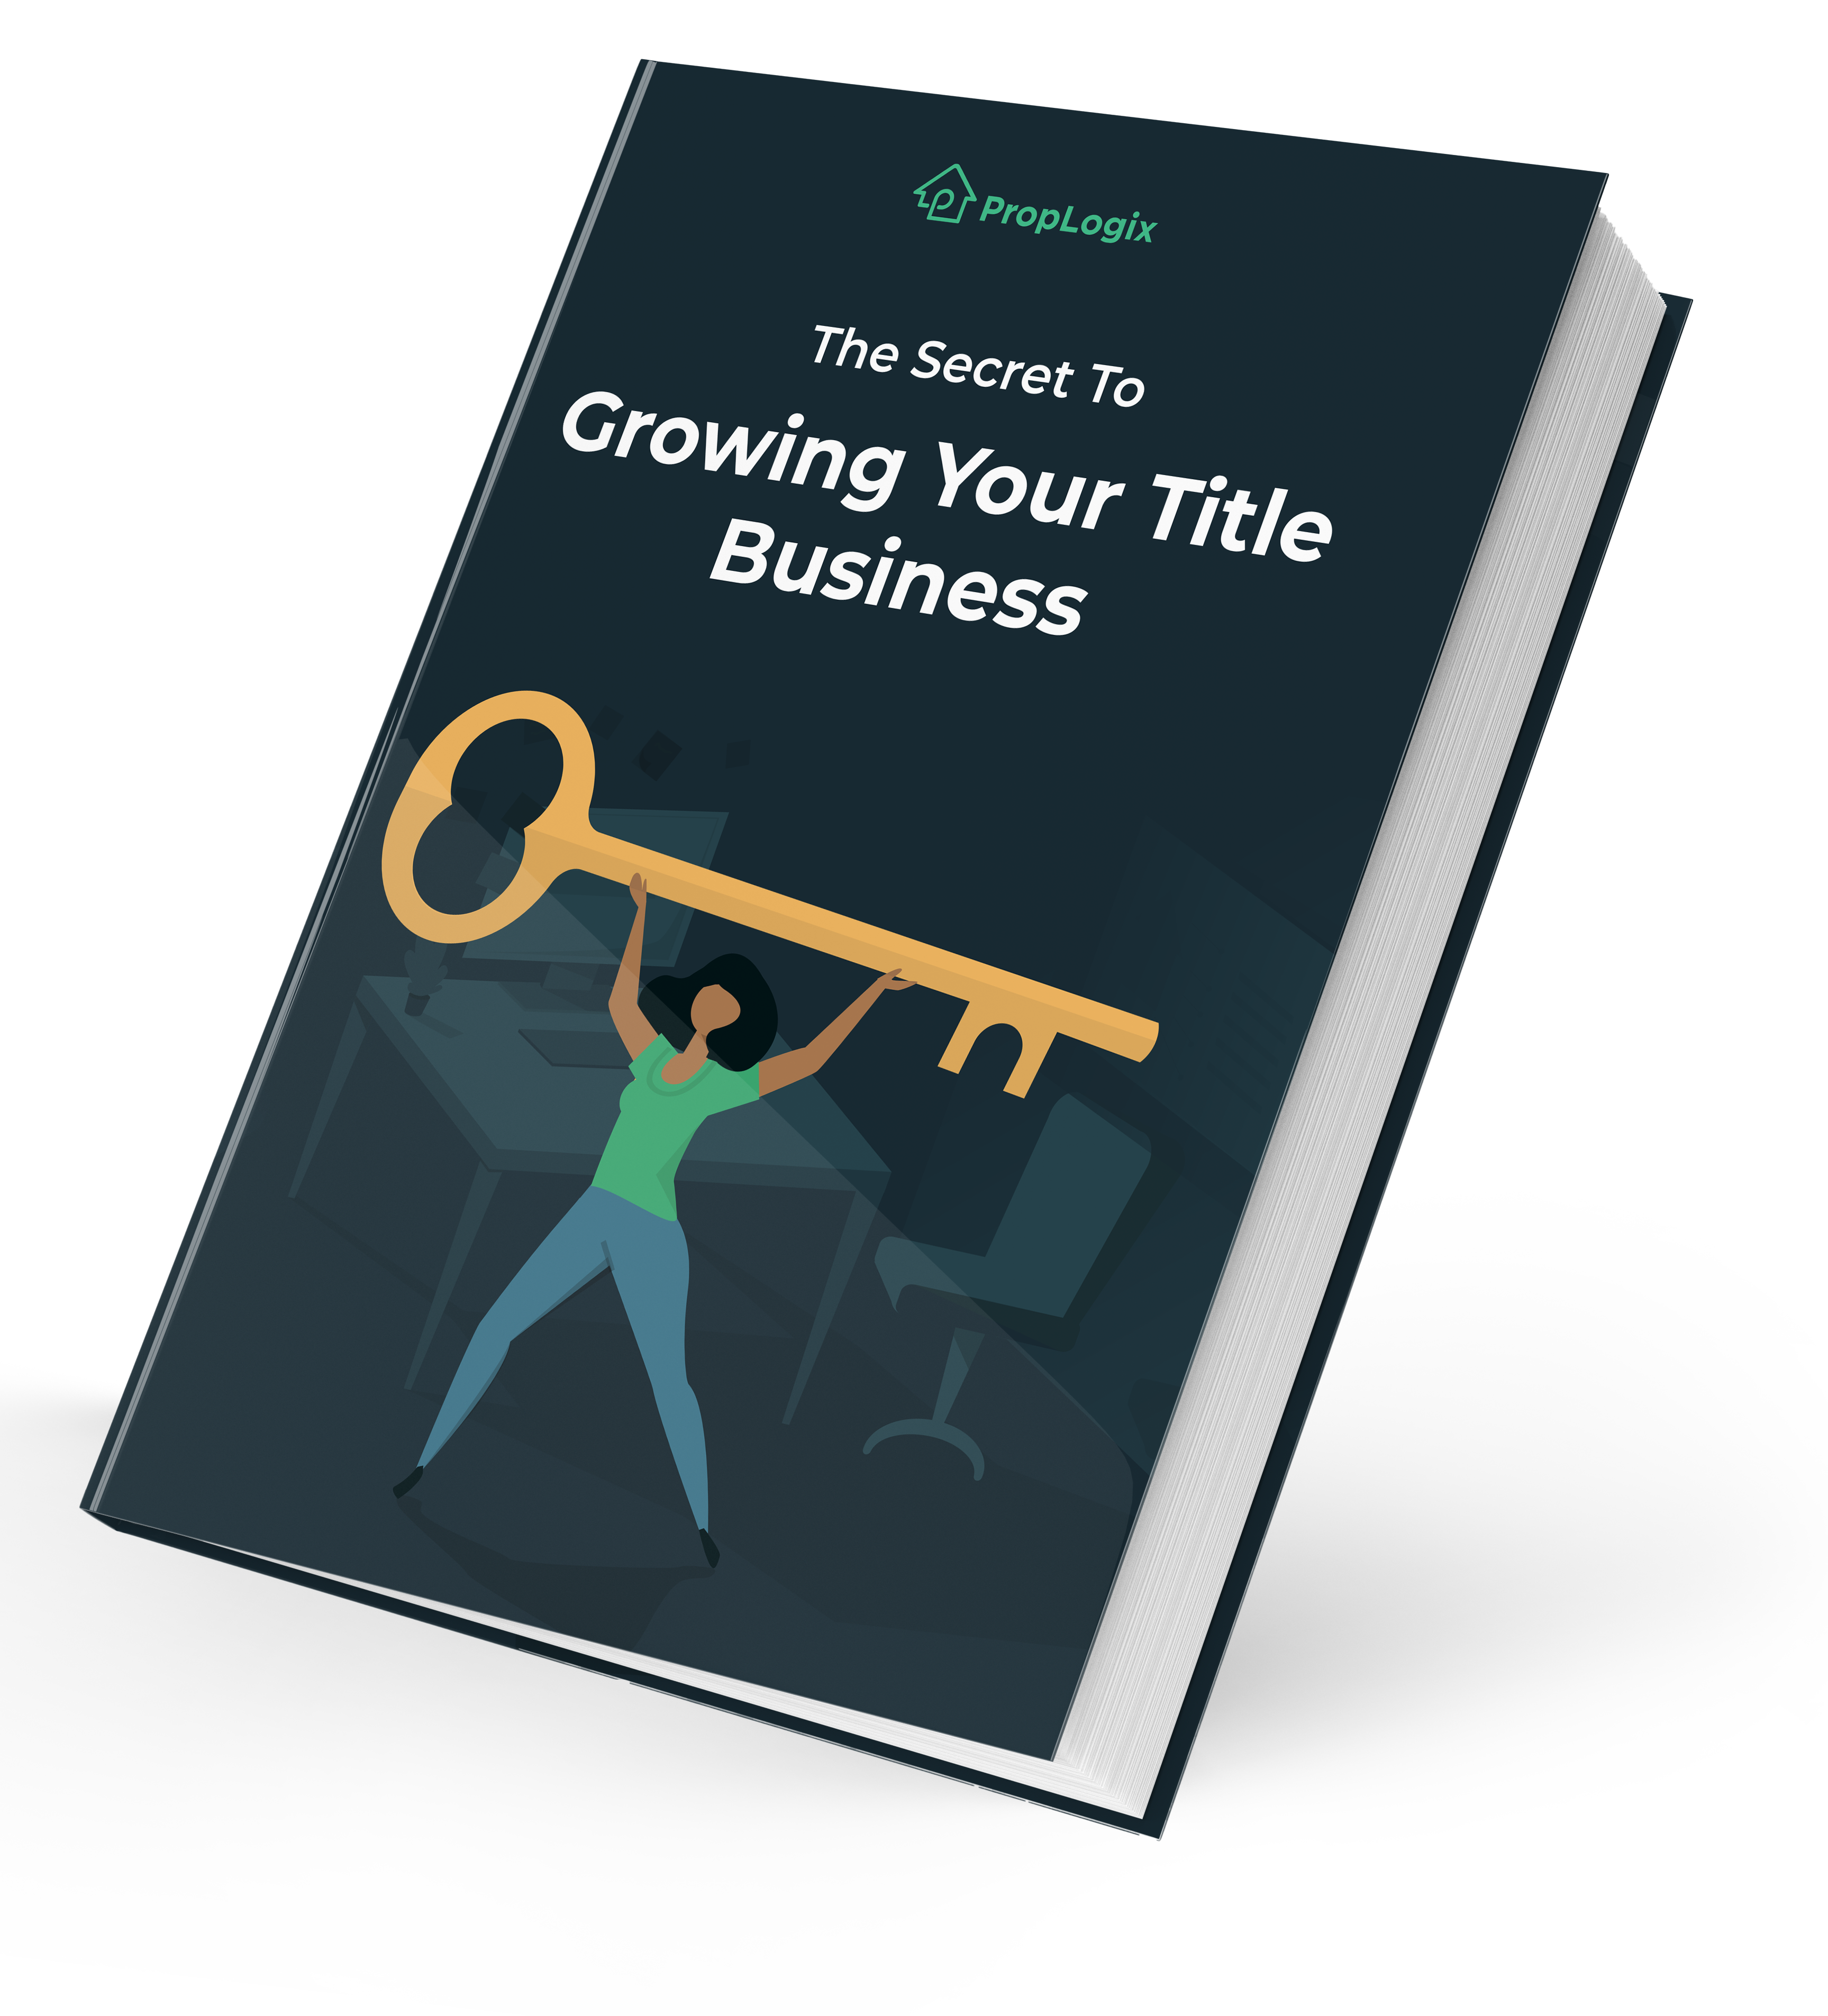 The Secret to Growing Your Title Business